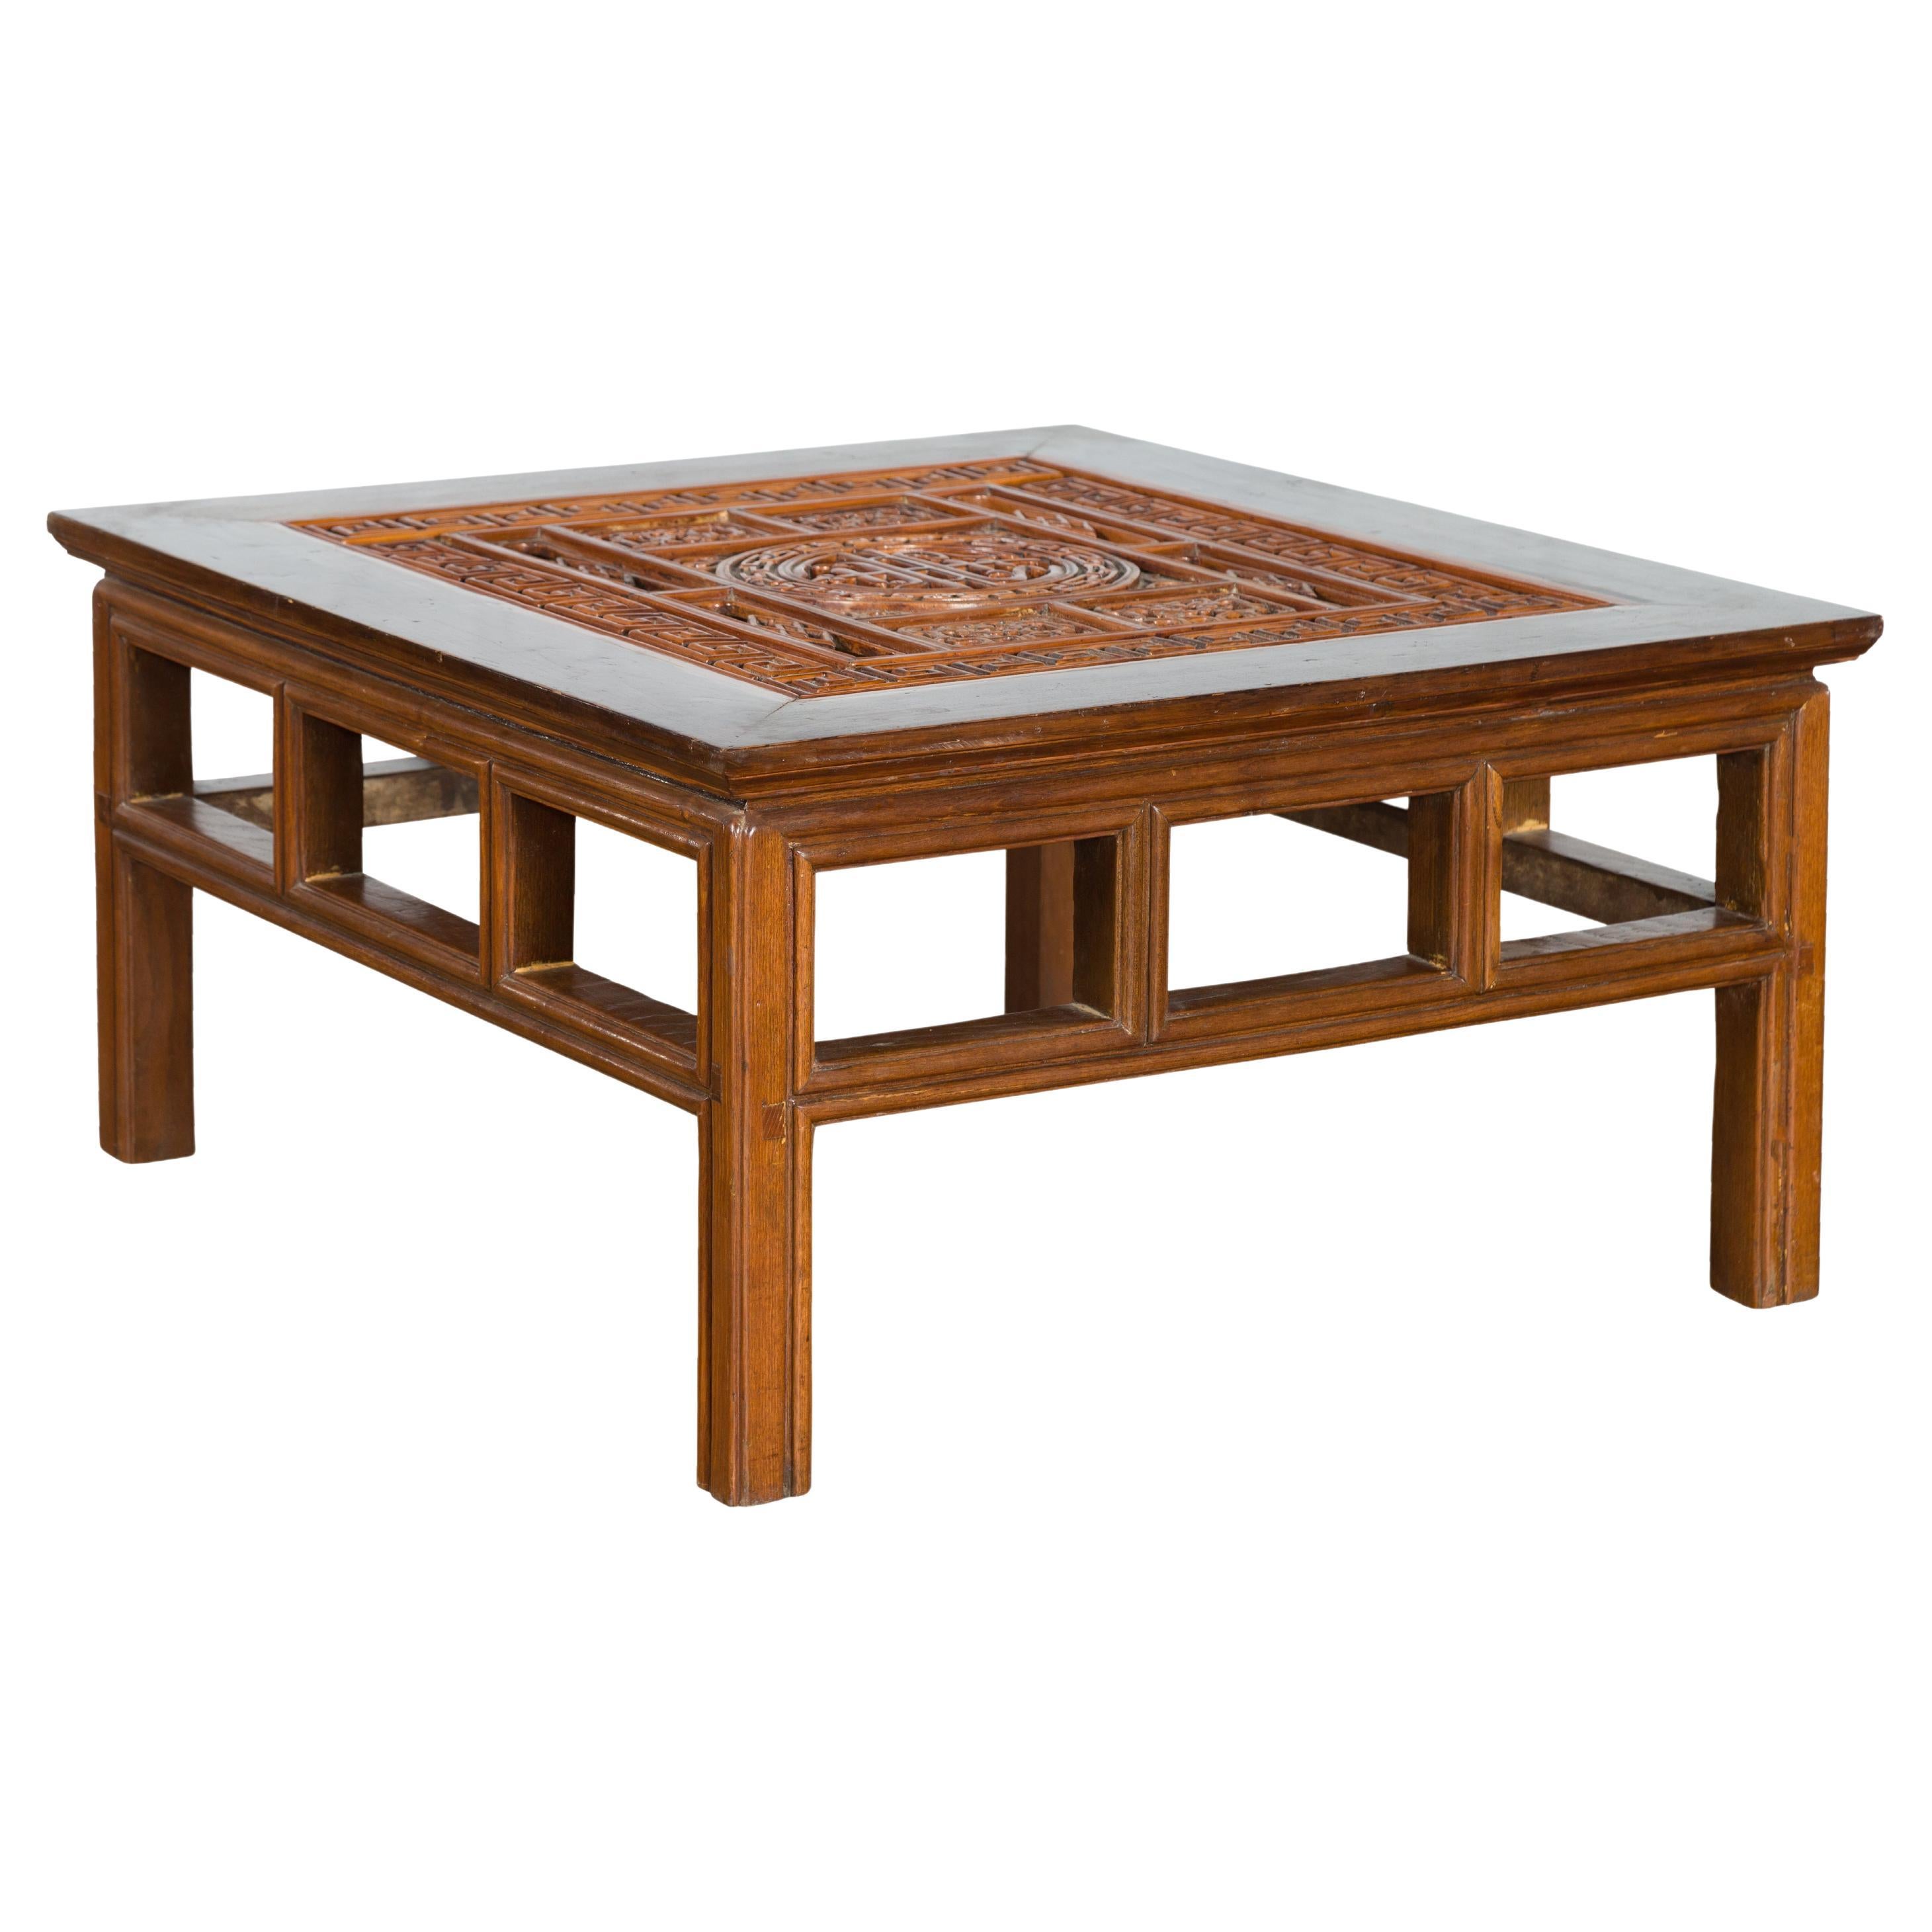 Chinese Qing Dynasty Period 19th Century Coffee Table with Carved Fretwork Top For Sale